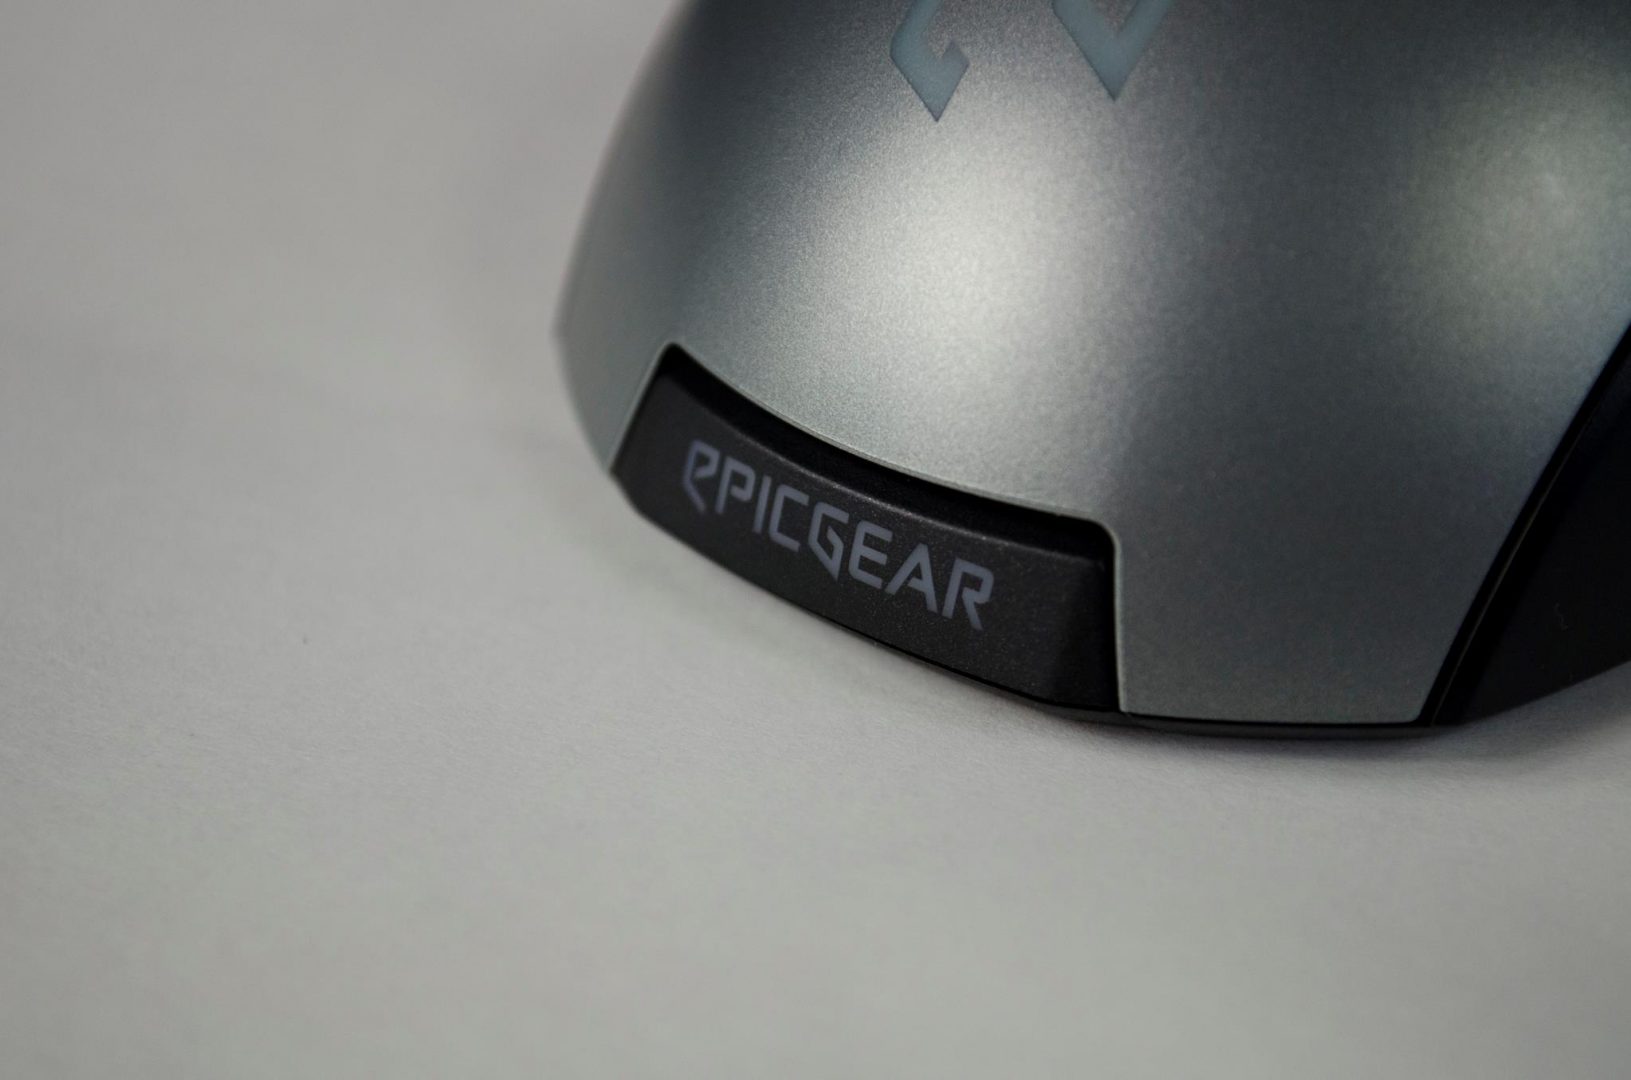 Modular Gaming Mouse: EpicGear Morpha X Review